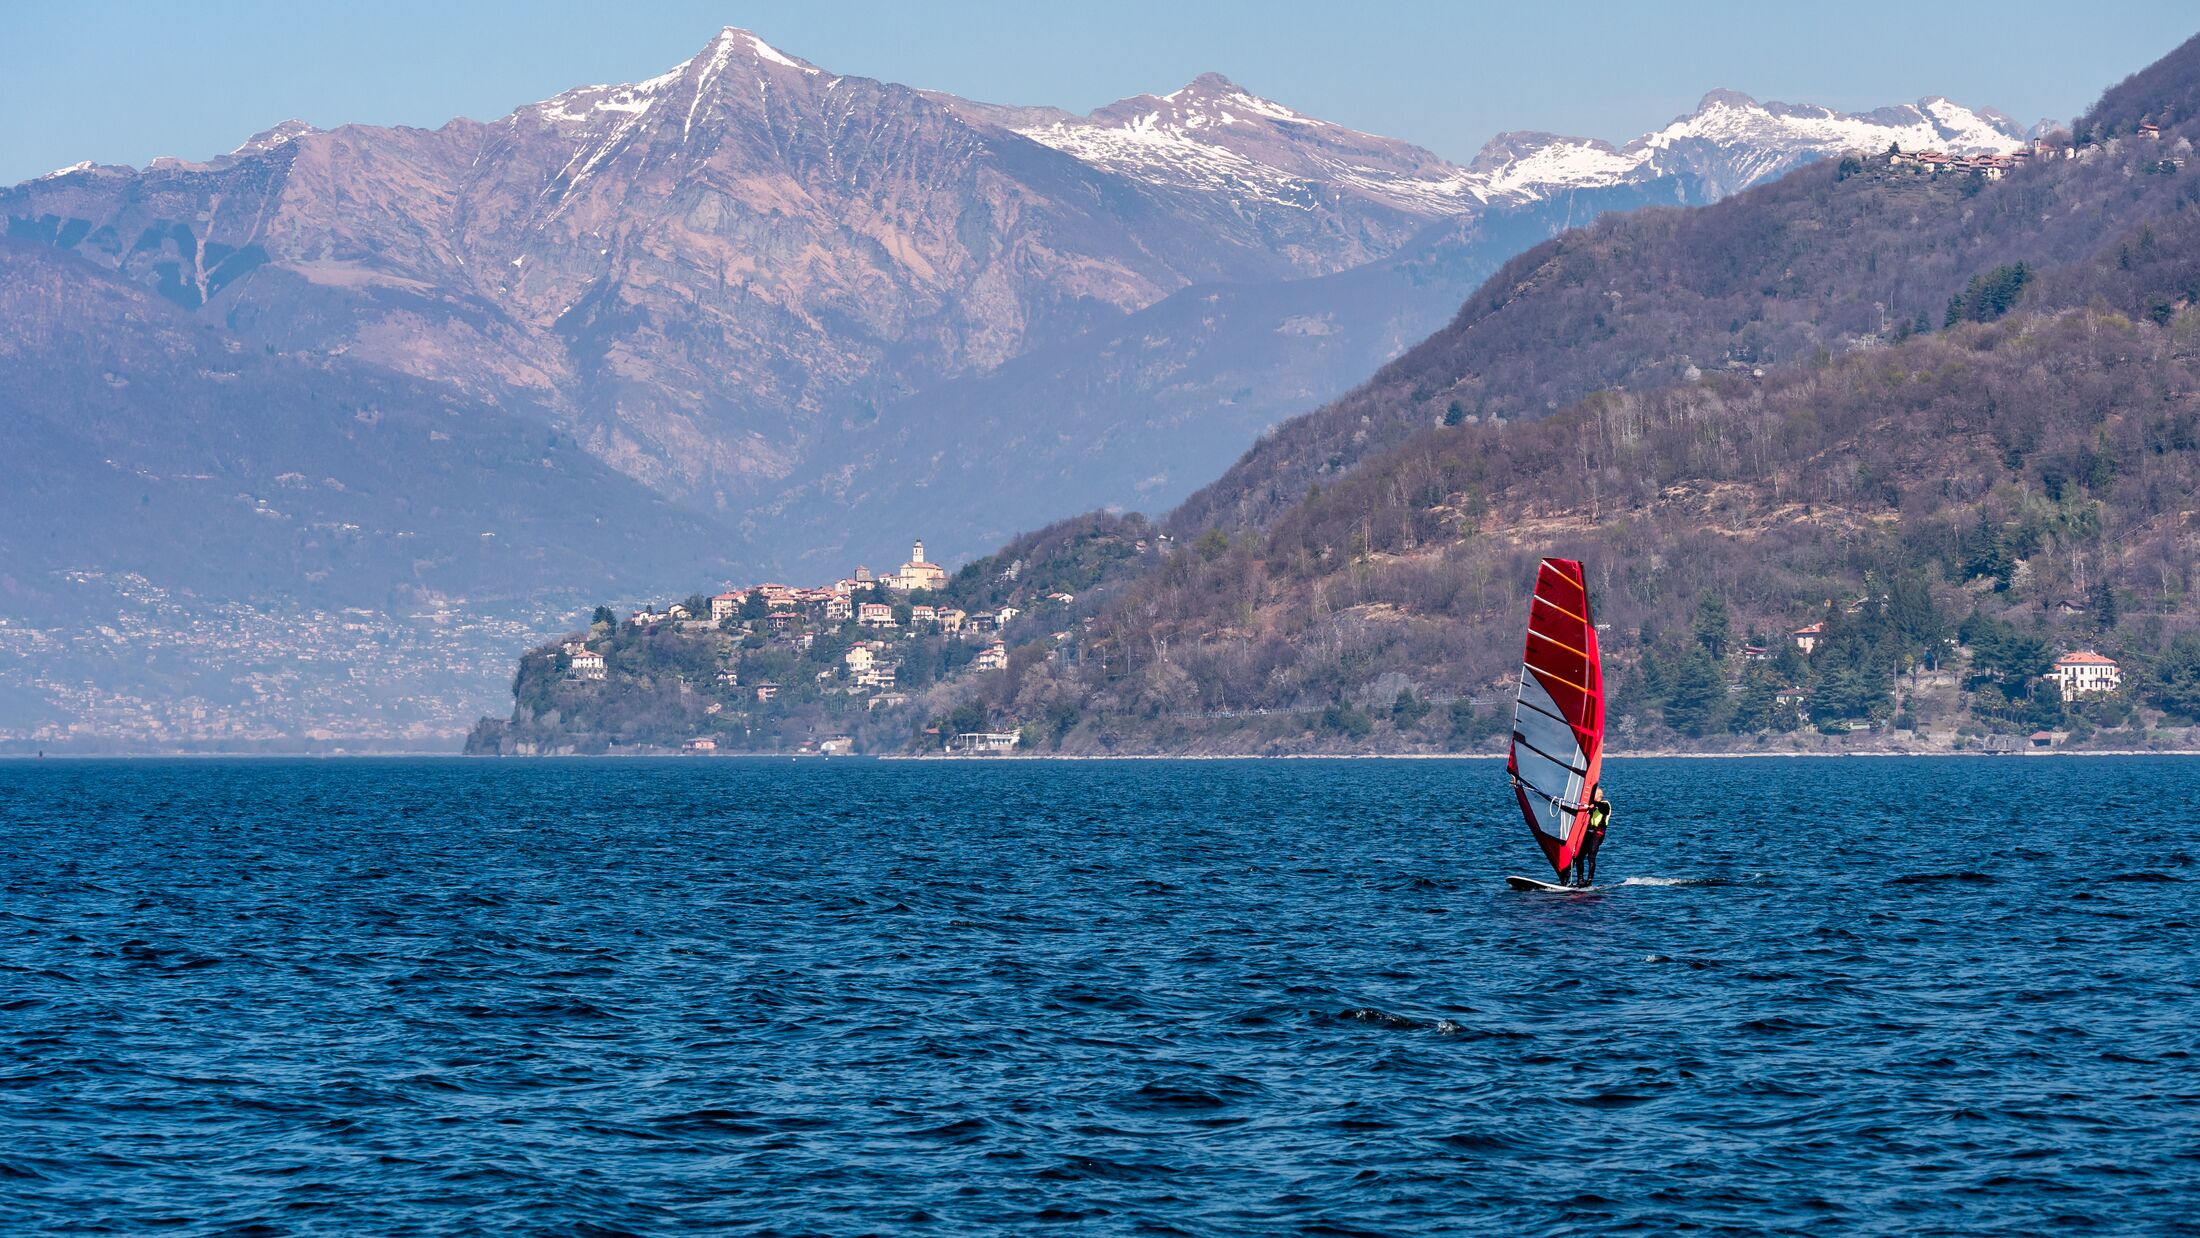 Image of surfer on the lake maggiore with city and alps with snow peaks in the background